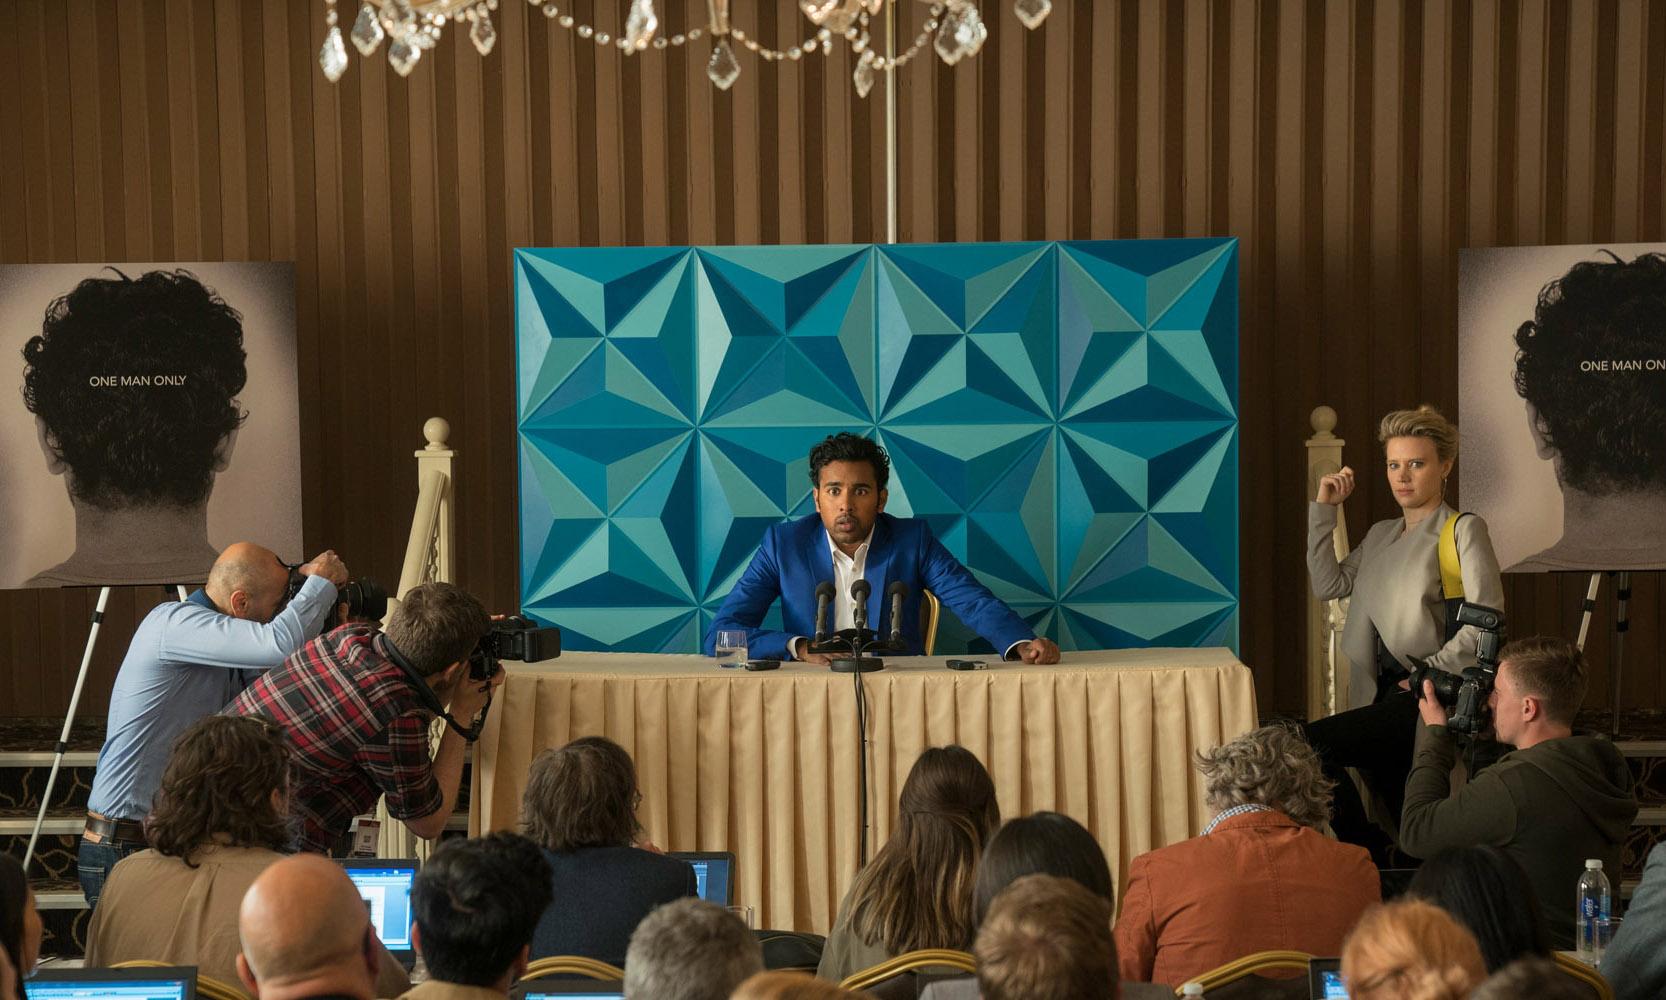 Himesh Patel in the new movie “Yesterday”